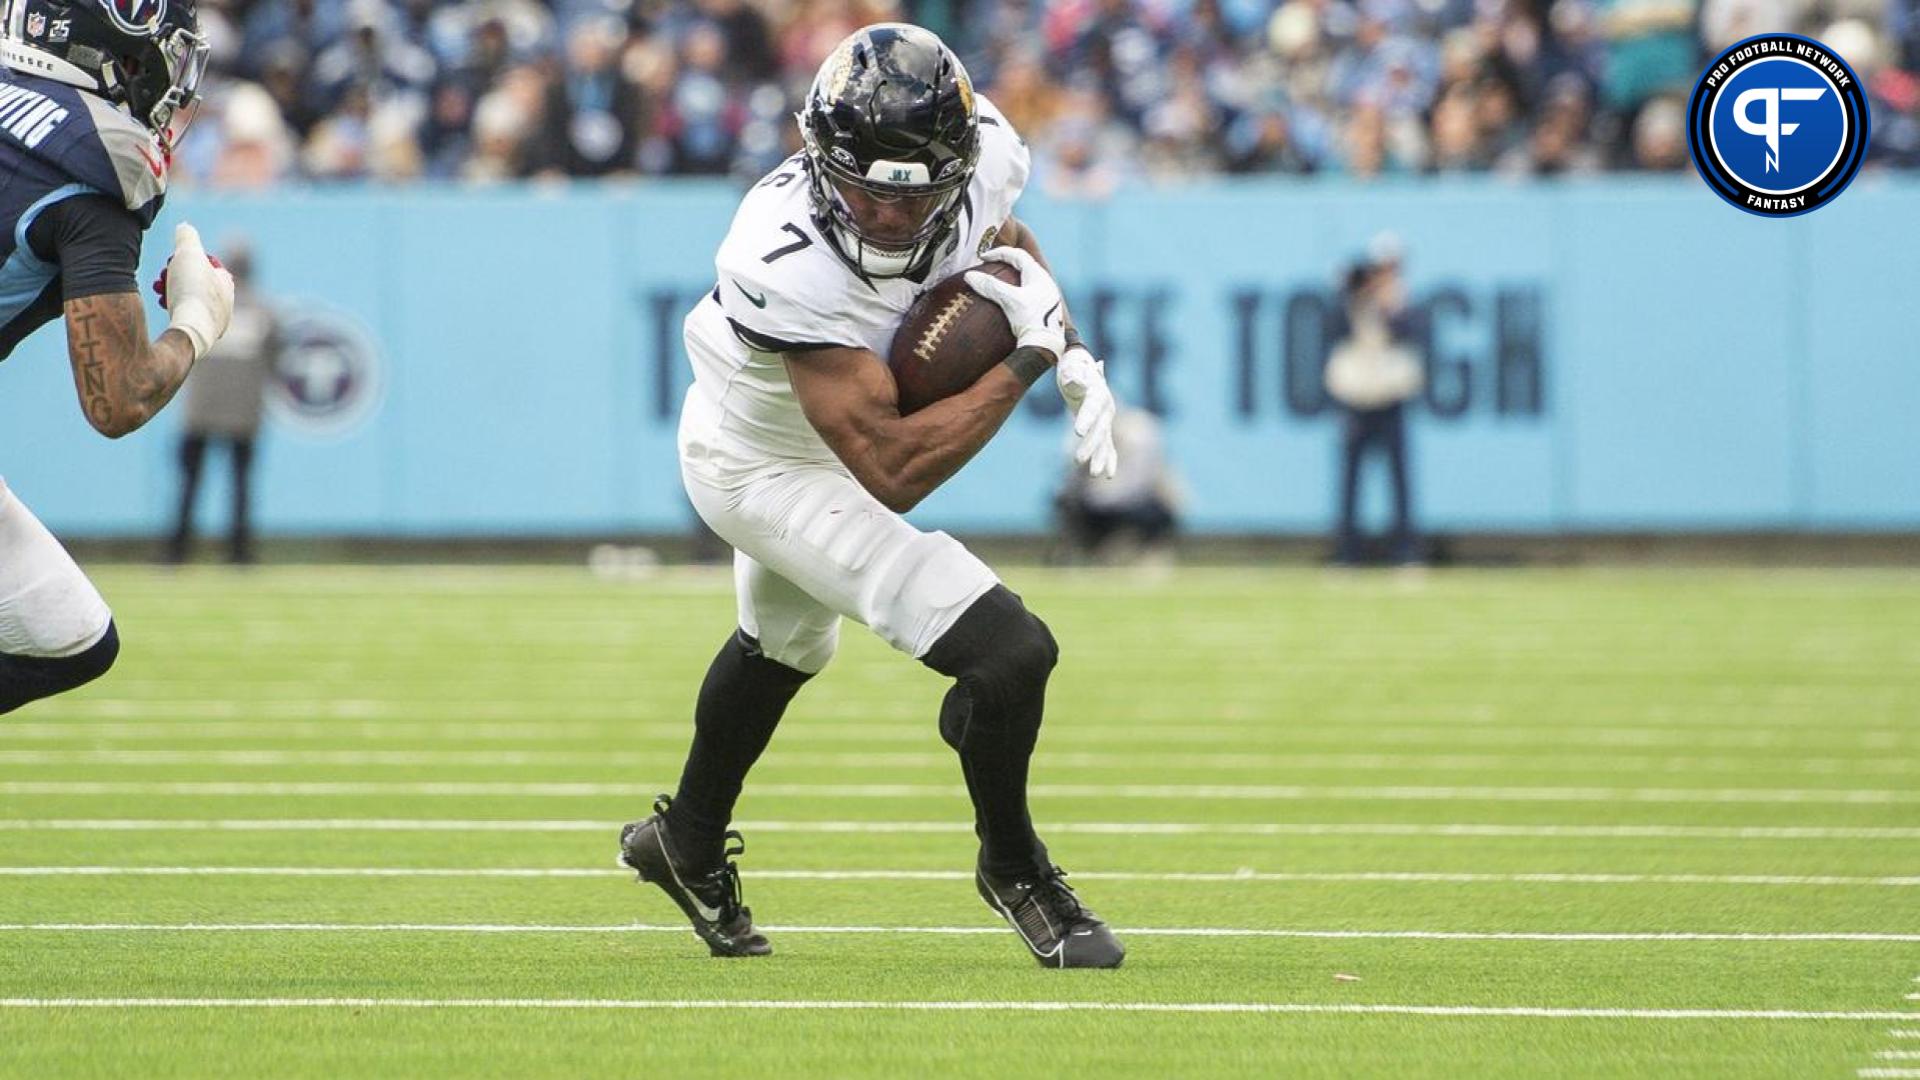 Jacksonville Jaguars wide receiver Zay Jones (7) runs the ball against the Tennessee Titans during the second half at Nissan Stadium.